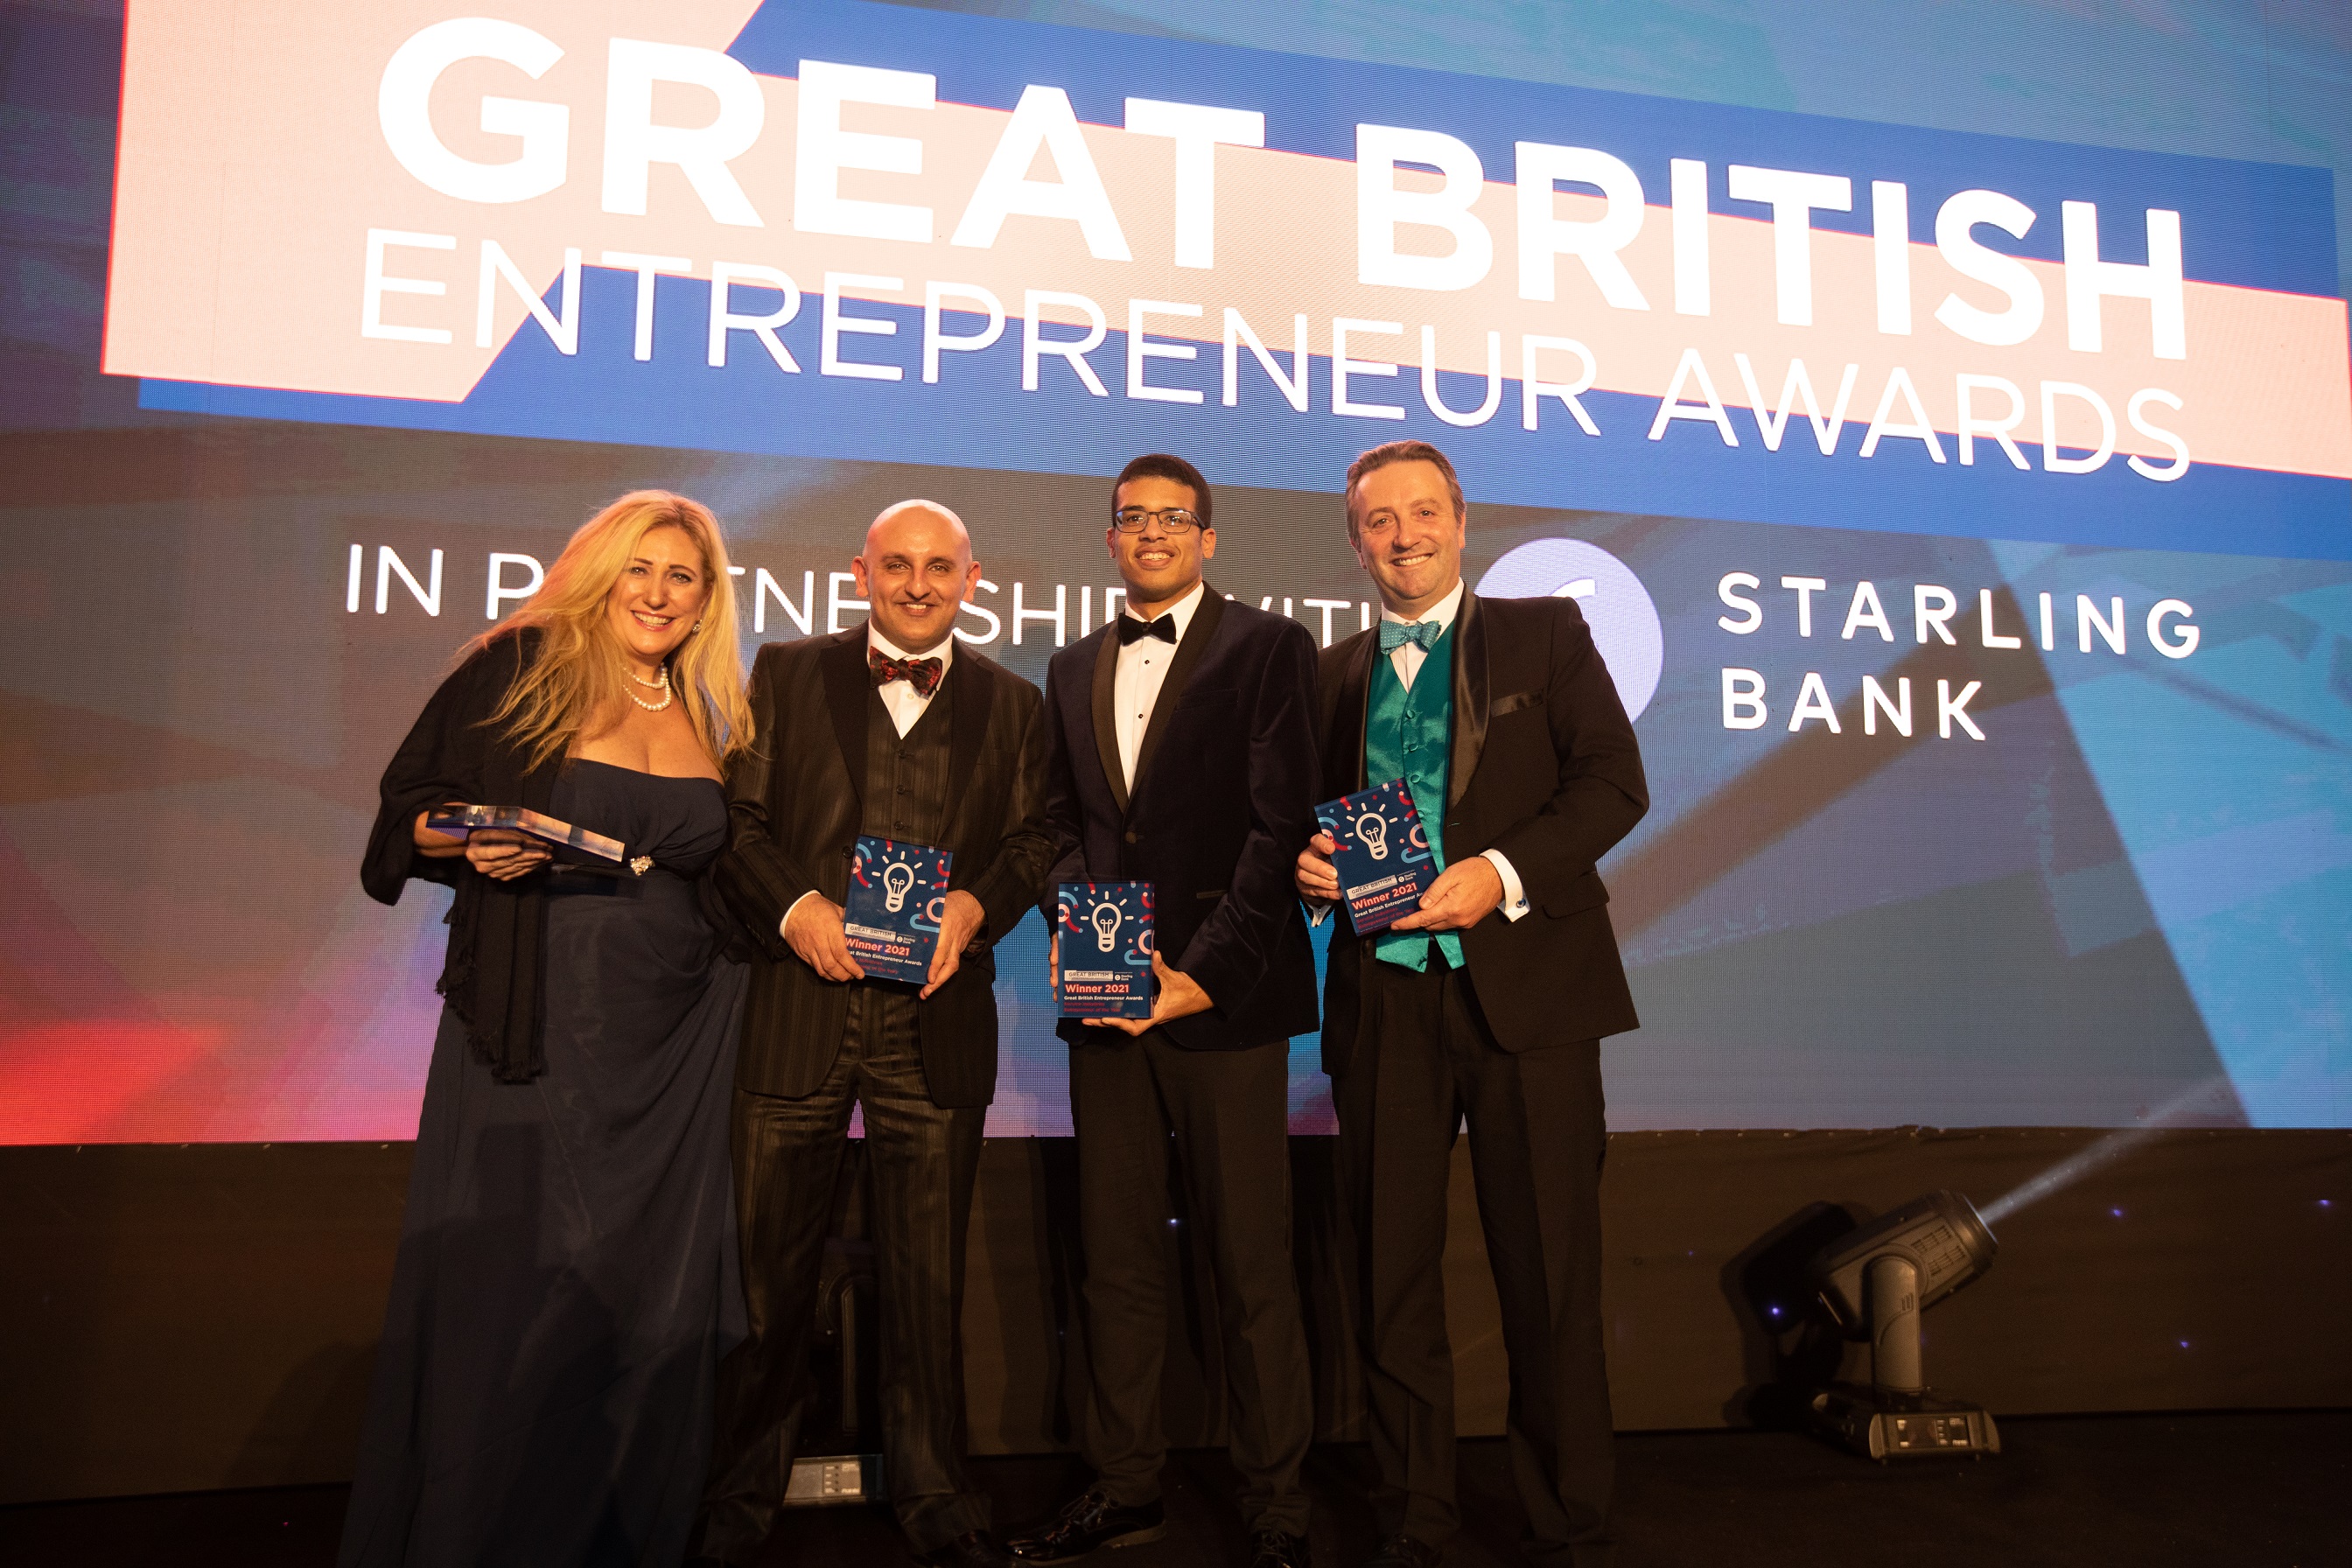 Lancashire's Own Lee Chambers victorious at the Great British Entrepreneur Awards